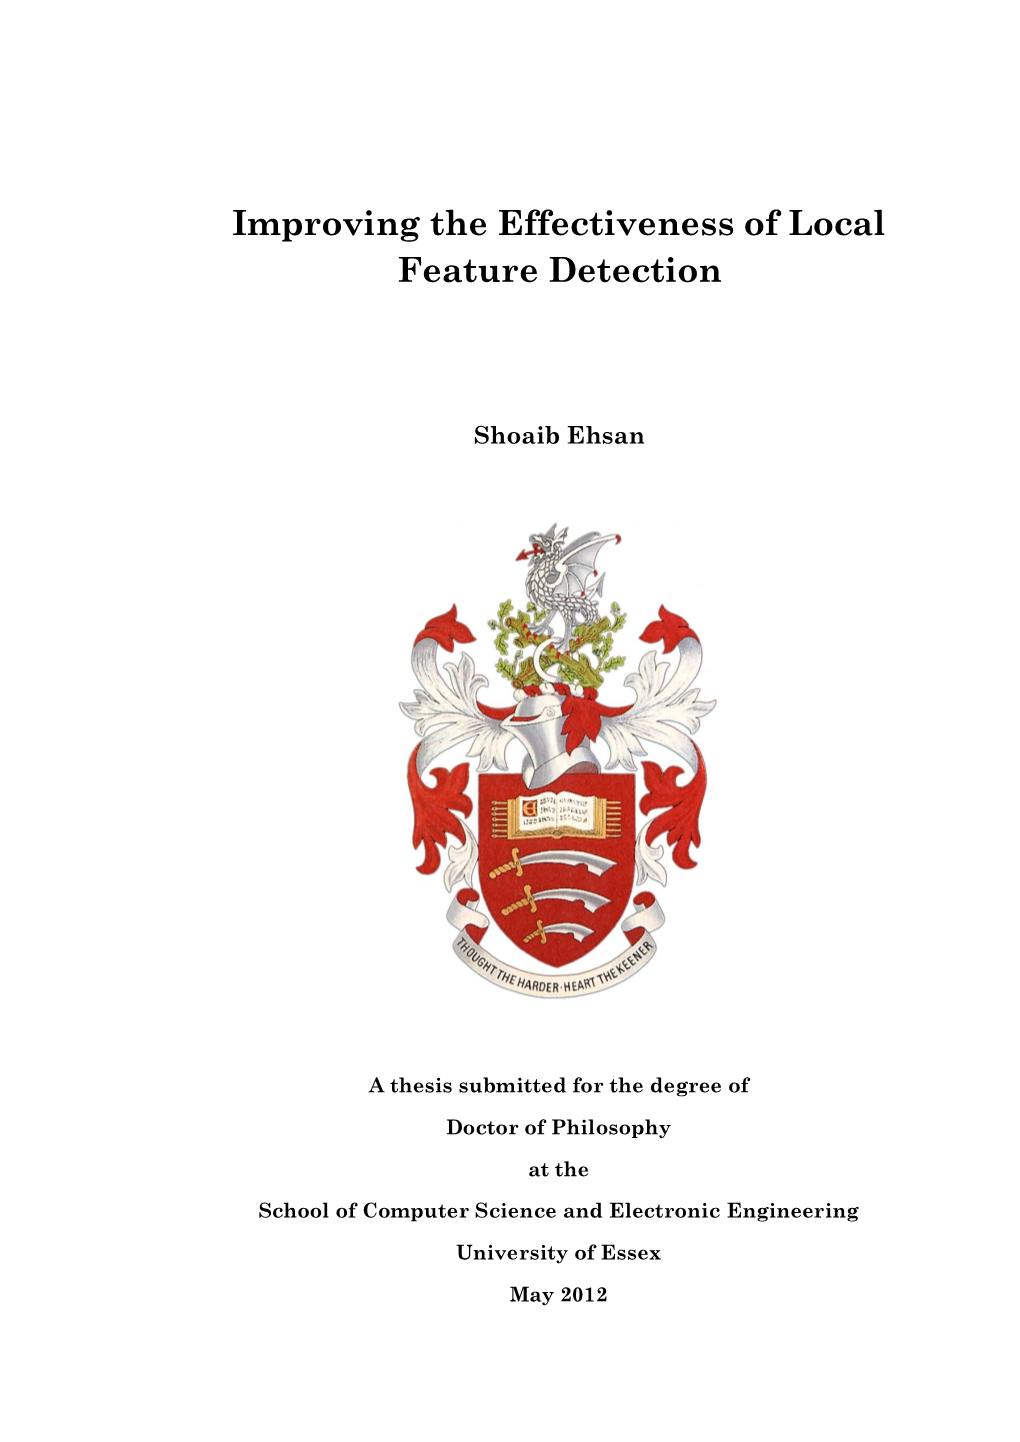 Improving the Effectiveness of Local Feature Detection